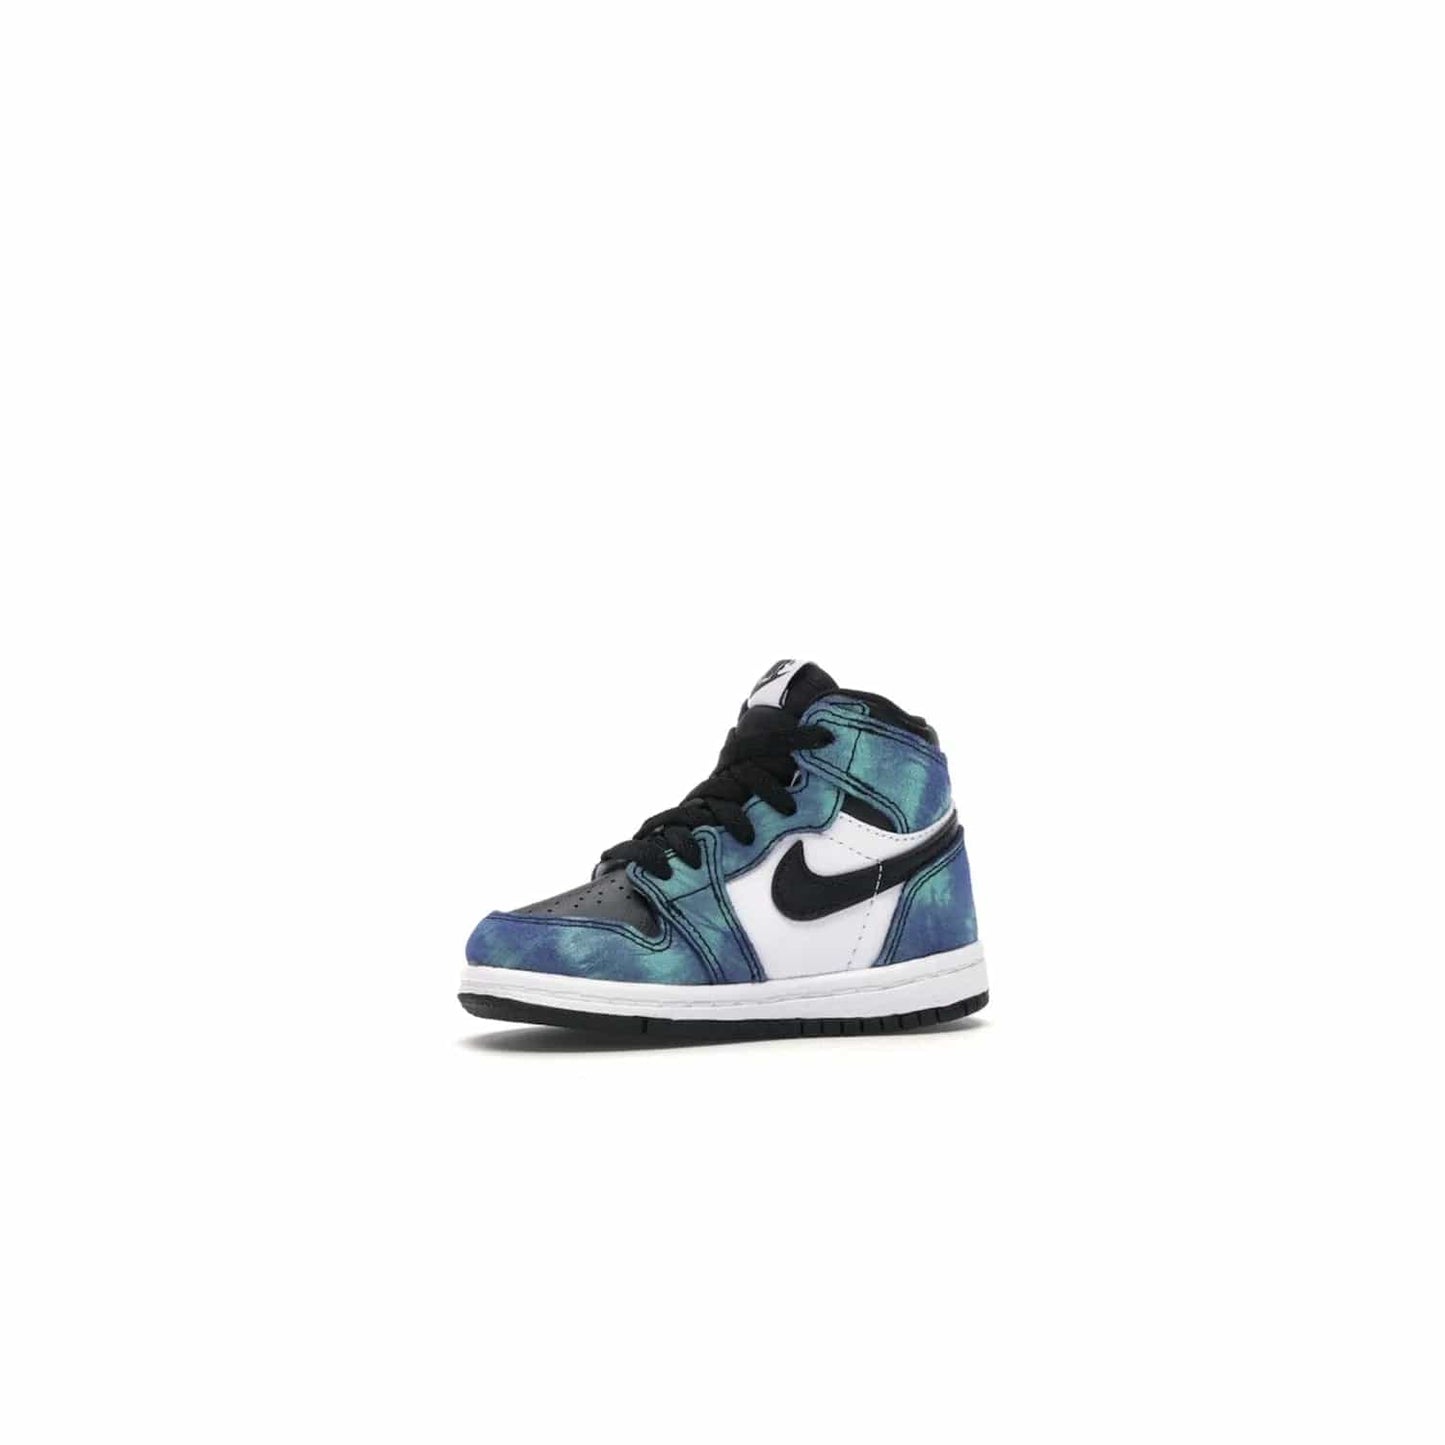 Jordan 1 Retro High Tie Dye (TD) - Image 17 - Only at www.BallersClubKickz.com - Add a unique twist to your sneaker collection with the Jordan 1 Retro High Tie Dye (TD). Classic Air Jordan 1 details like toe box perforations and the signature Swoosh logo on the sidewall are topped with an eye-catching tie dye design that’s perfect for styling all year round.